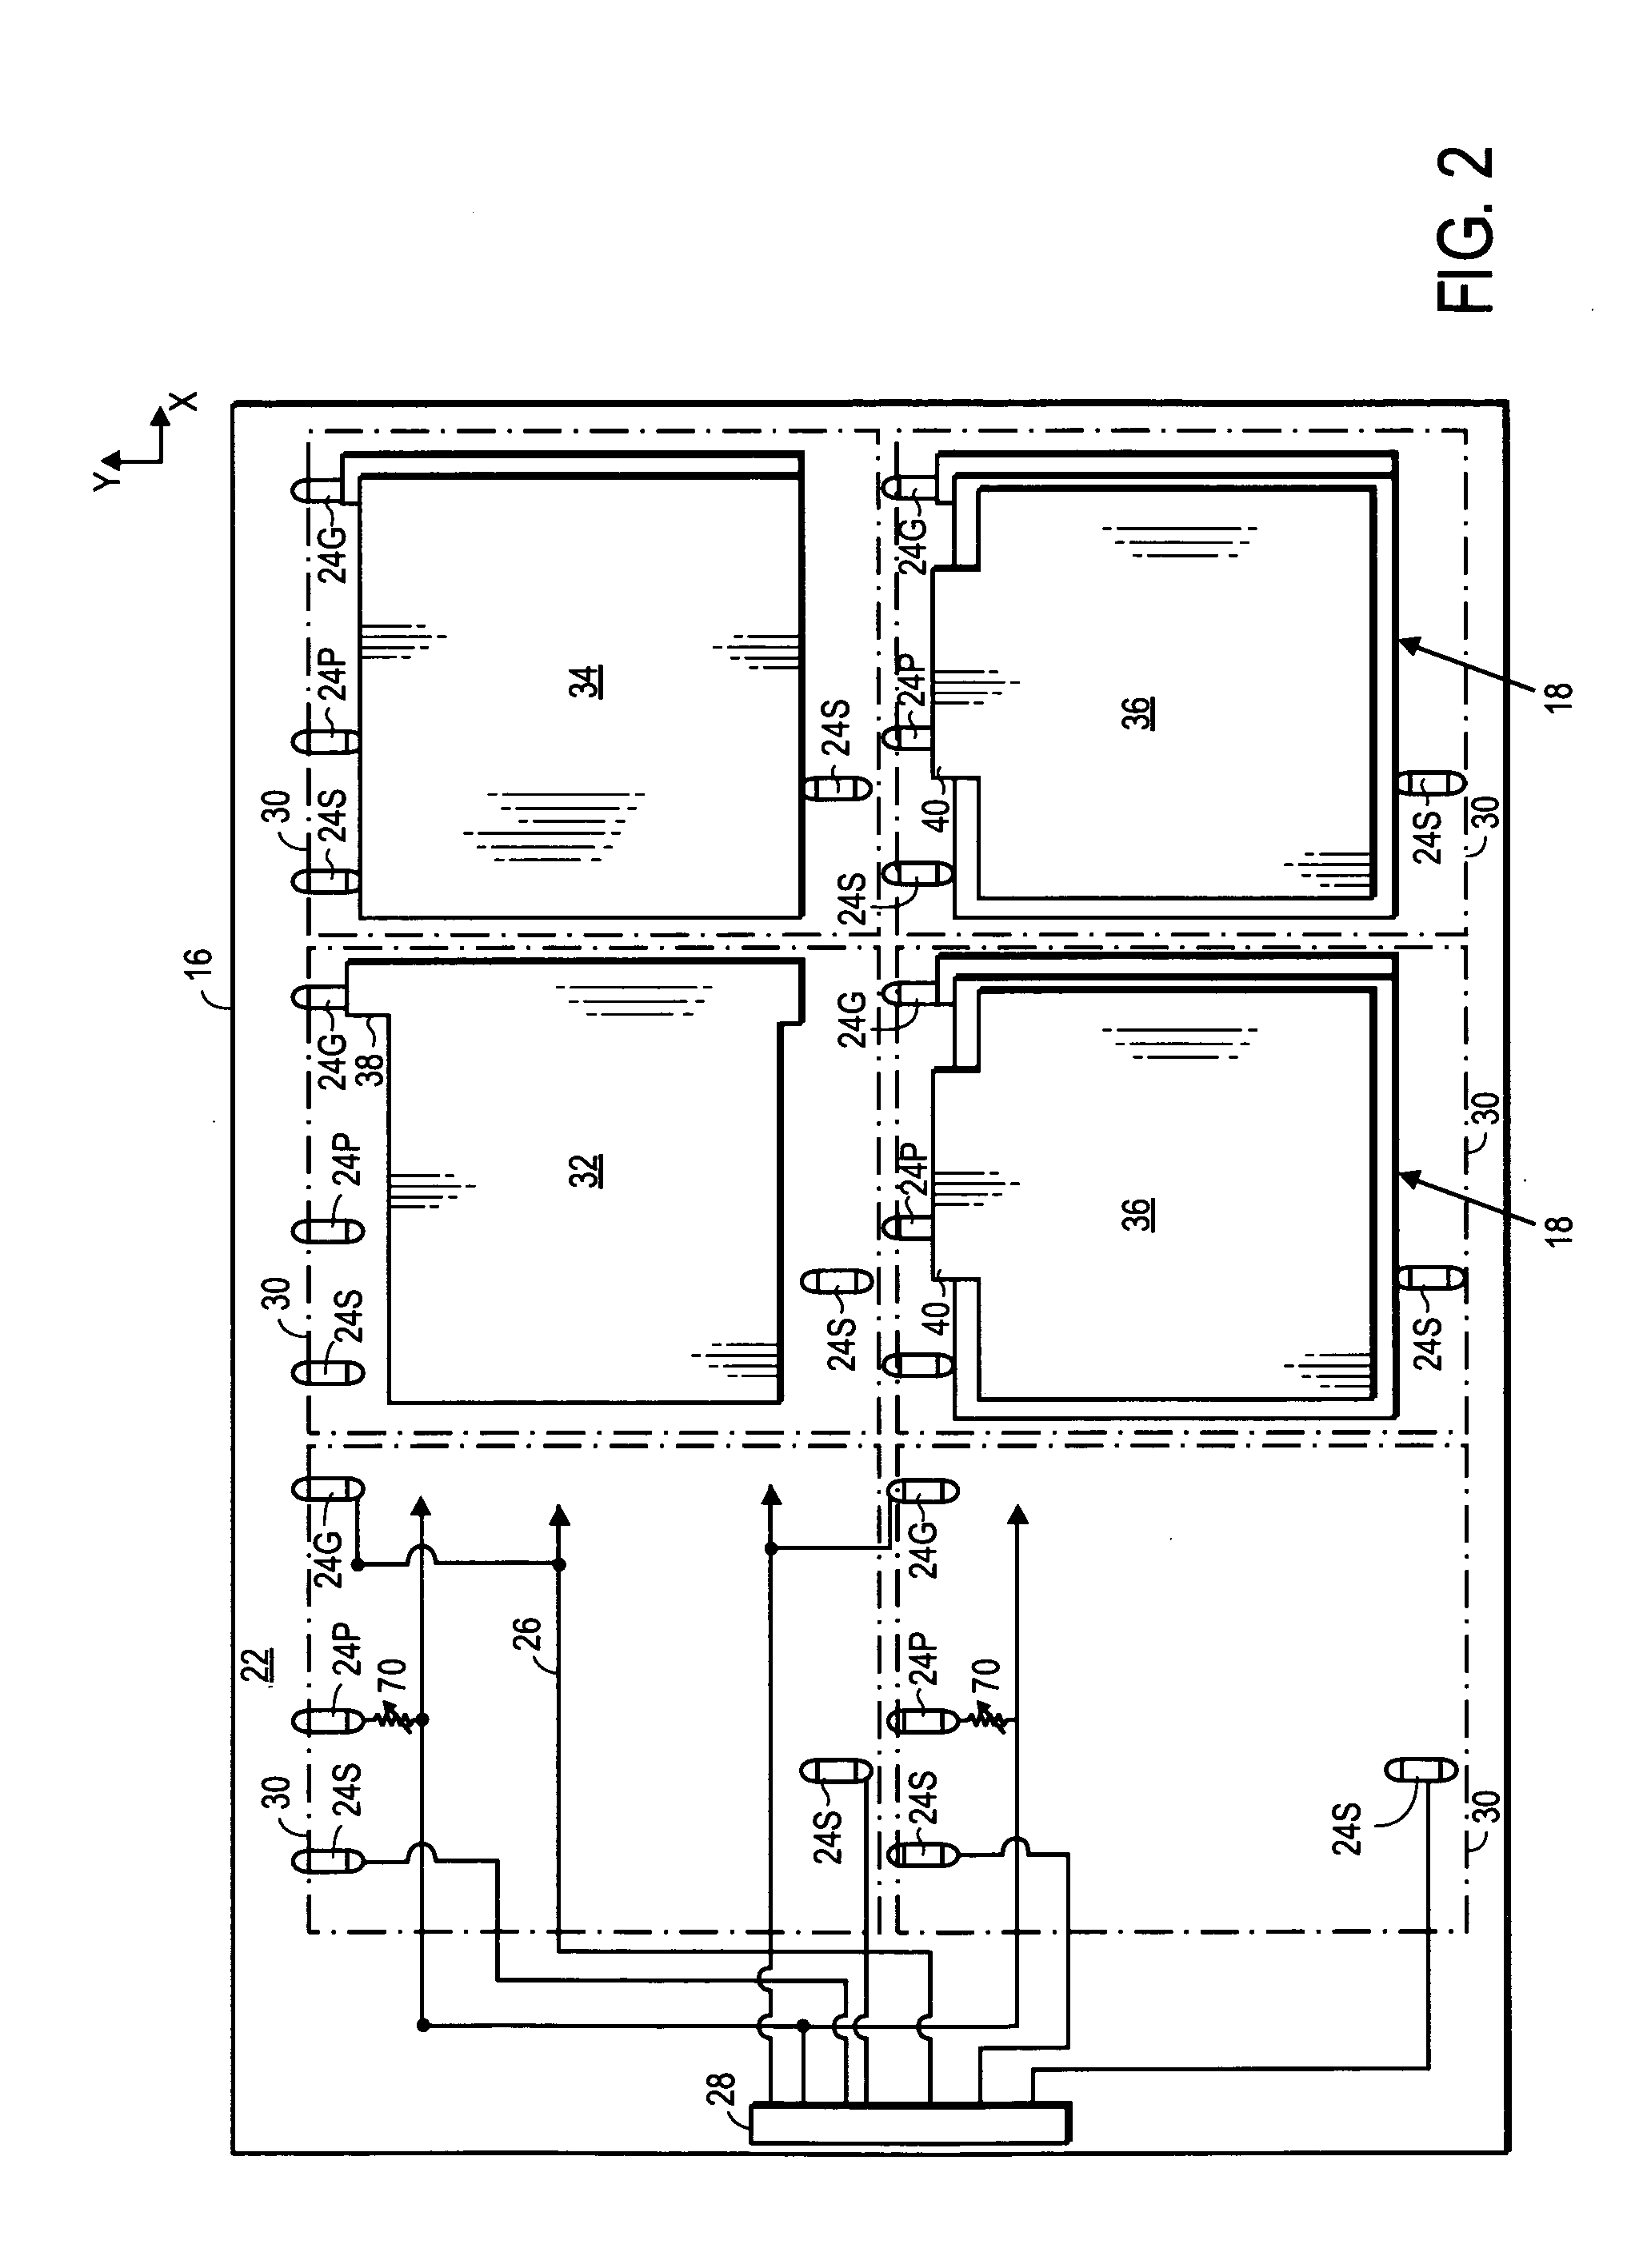 System for testing and burning in of integrated circuits